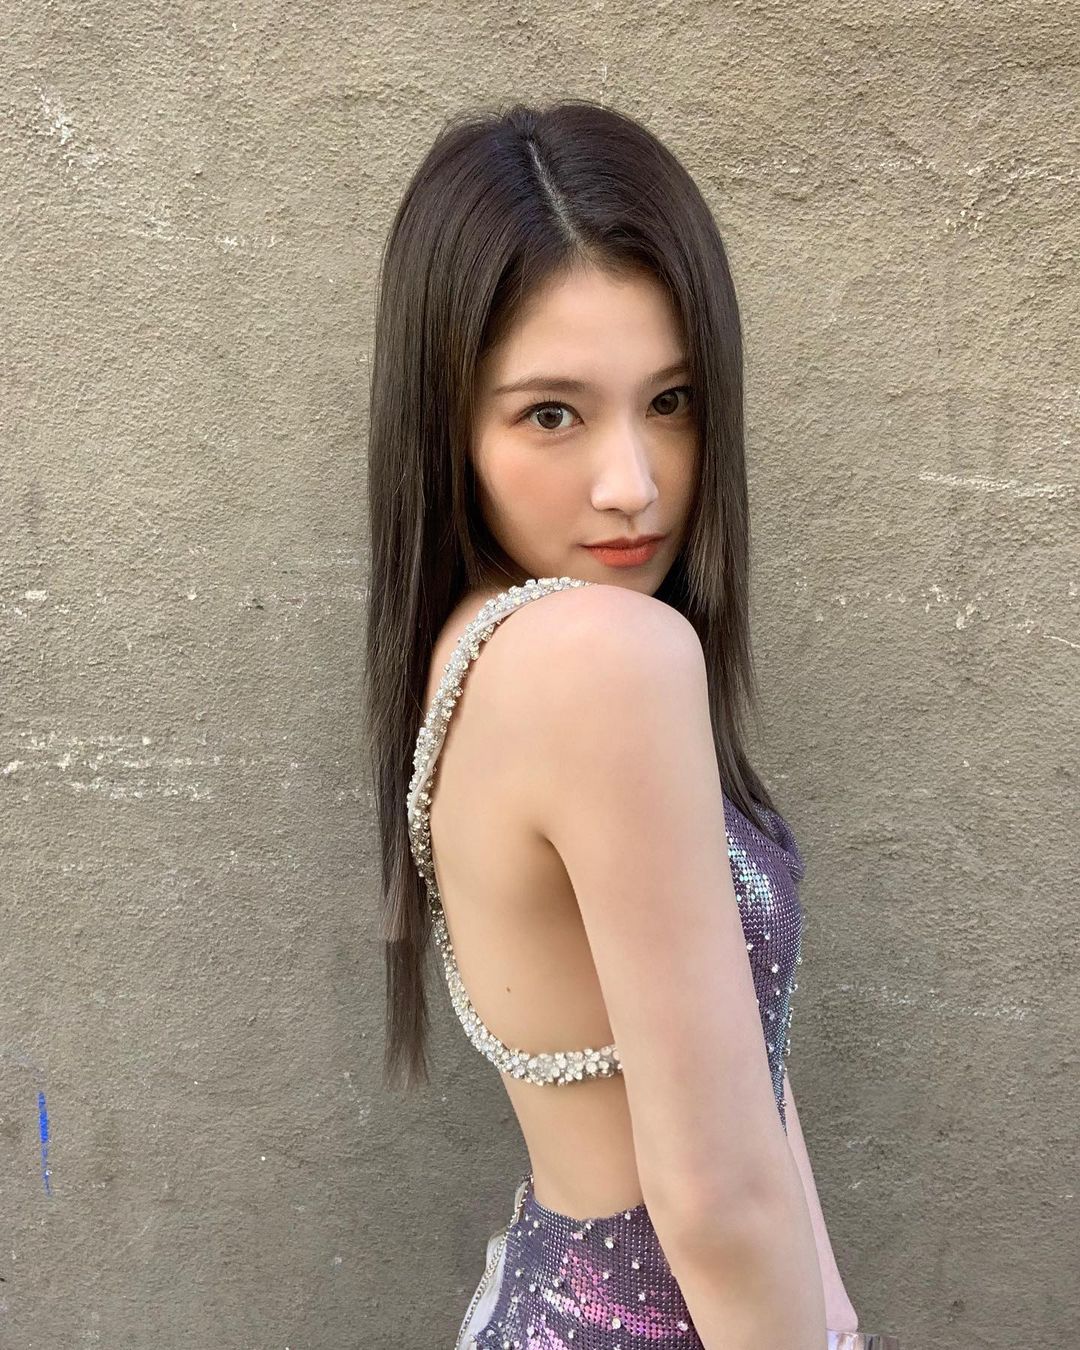 Sana exposes her daring back...exceeding her sexy limit